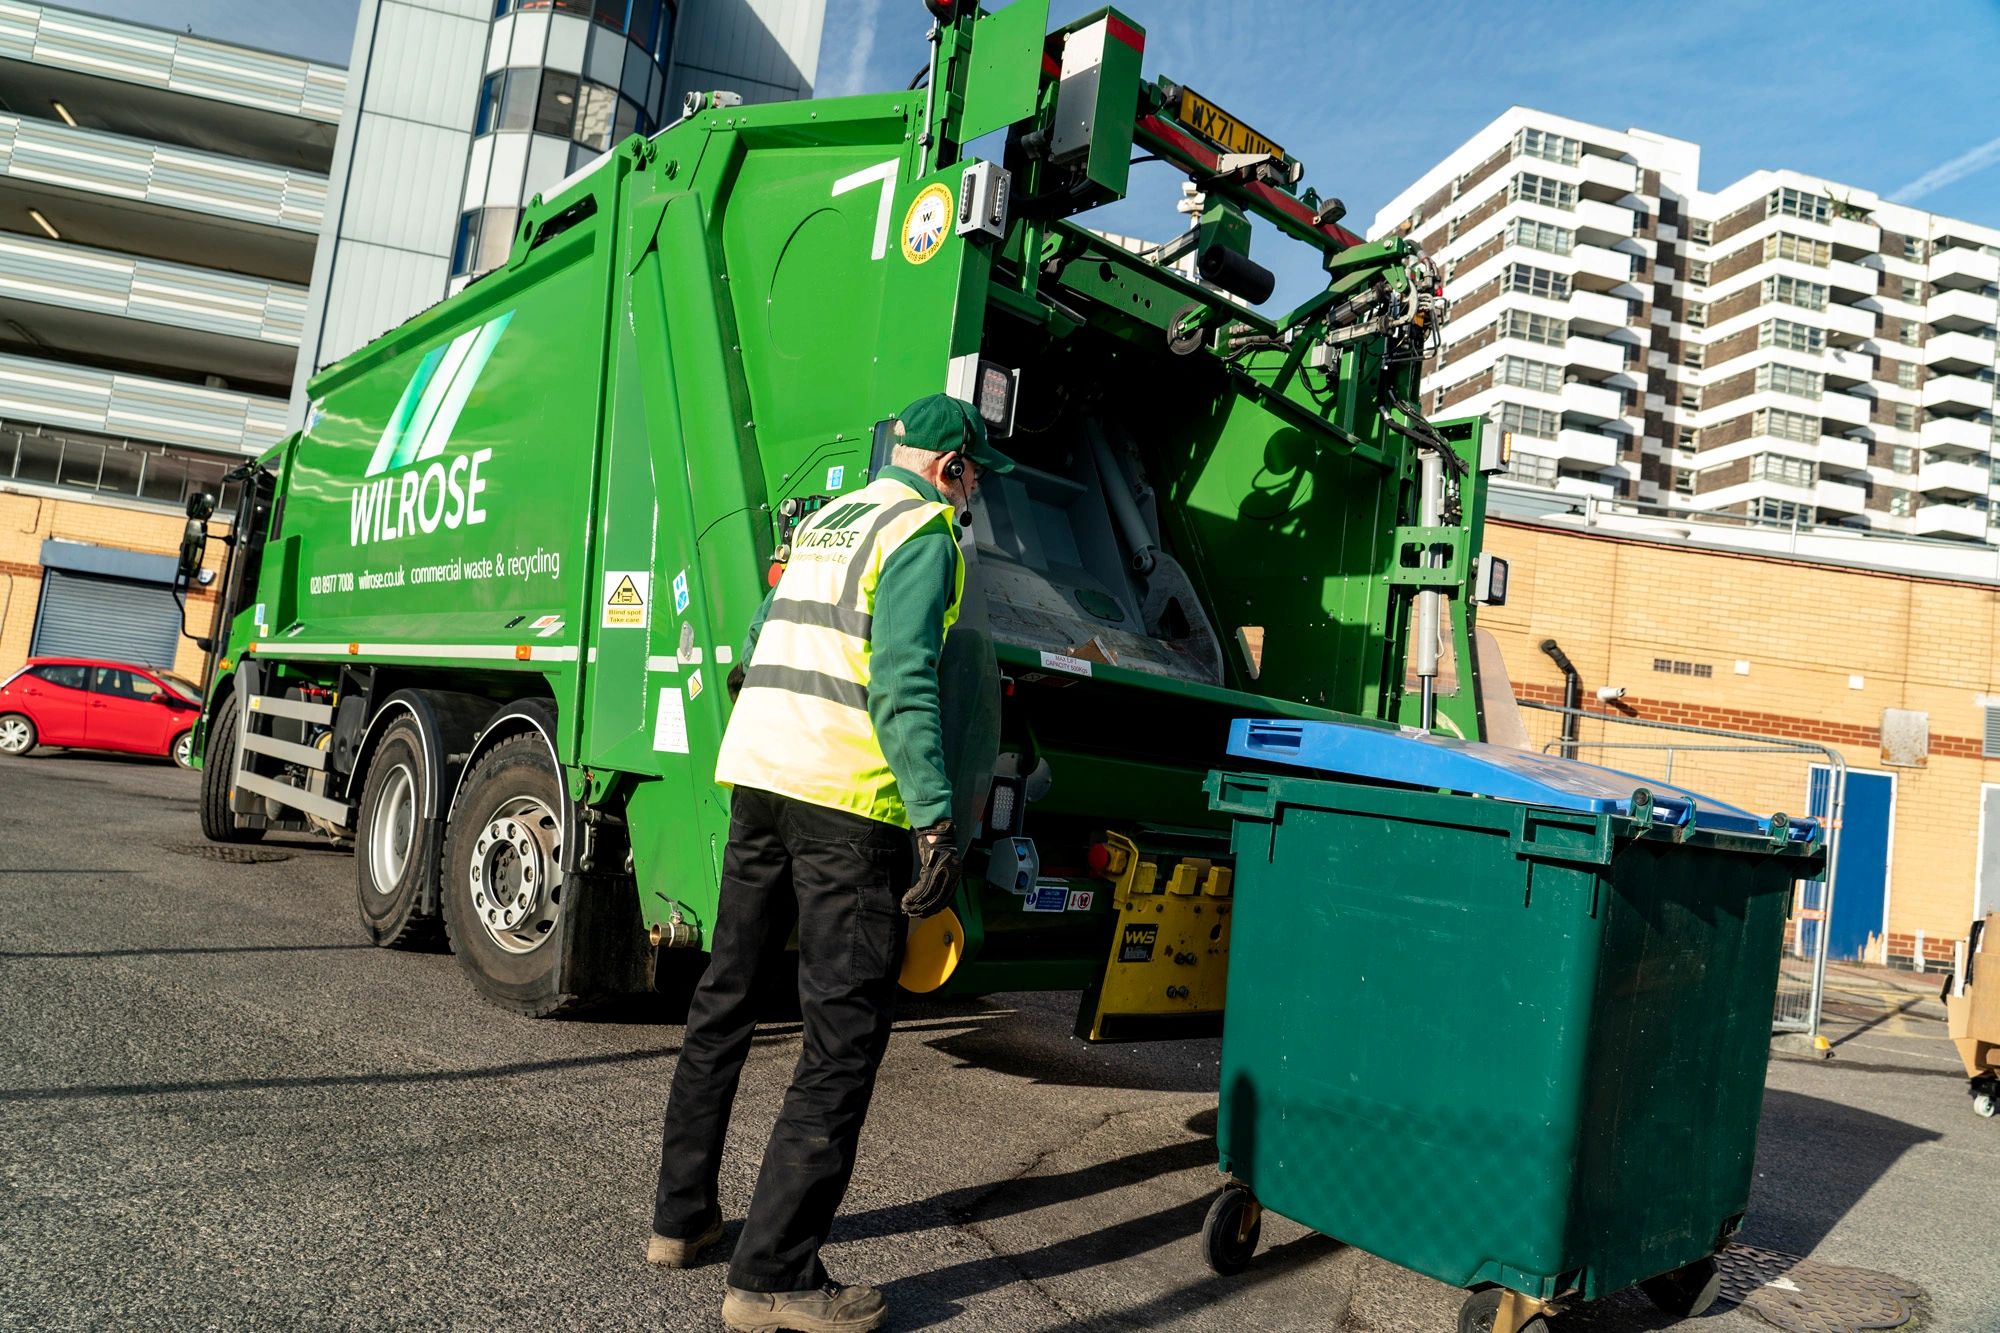 Commercial Waste Collection - Wilrose Environmental